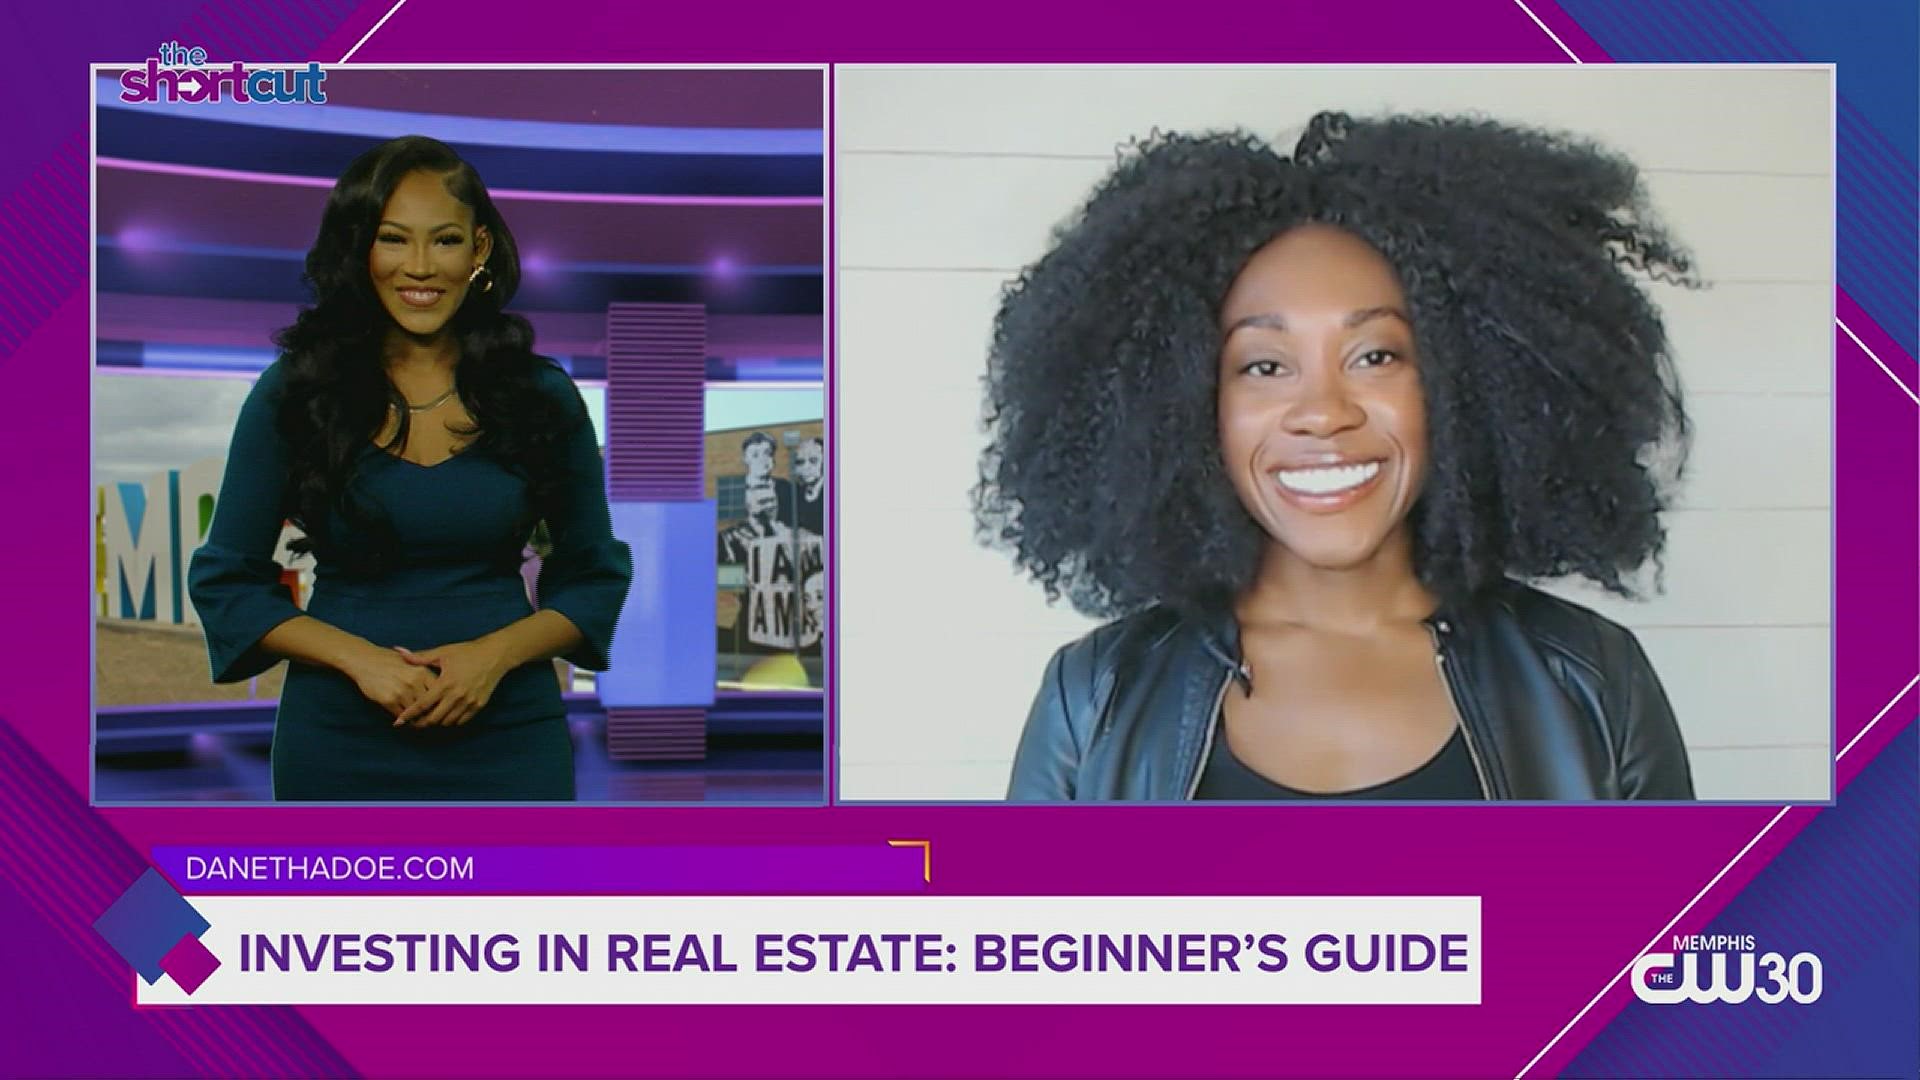 Did you know that it's possible to invest in real estate without having a lot of money on hand? Find out how and other real estate investing tips from Danetha Doe.